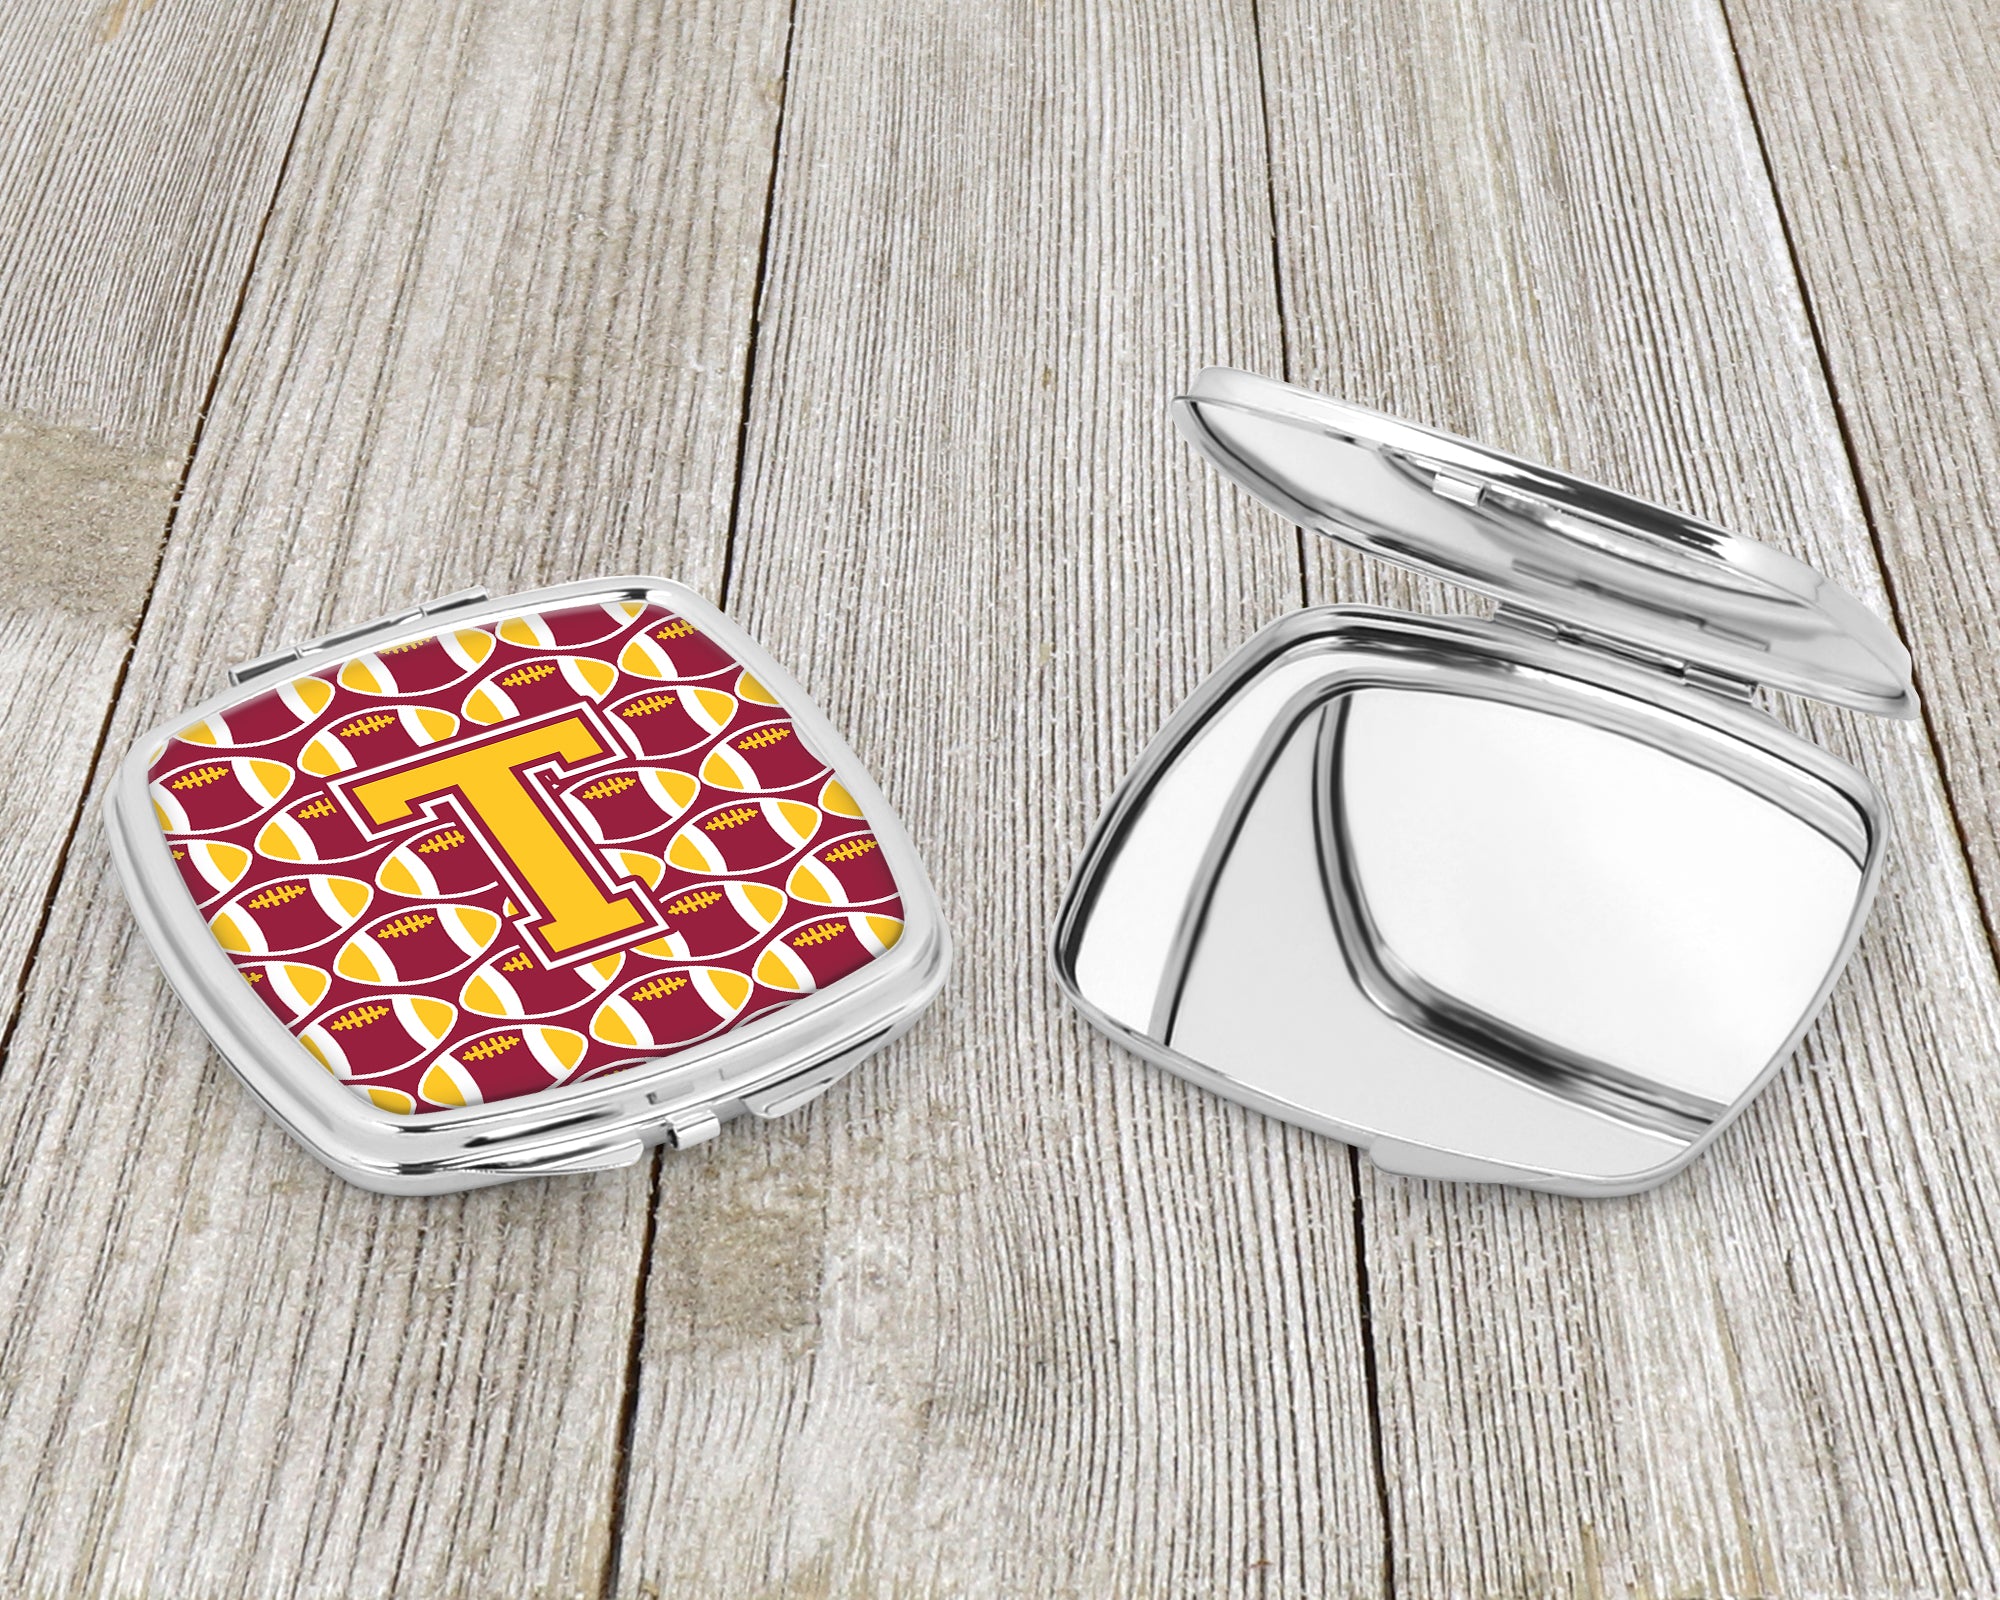 Letter T Football Maroon and Gold Compact Mirror CJ1081-TSCM